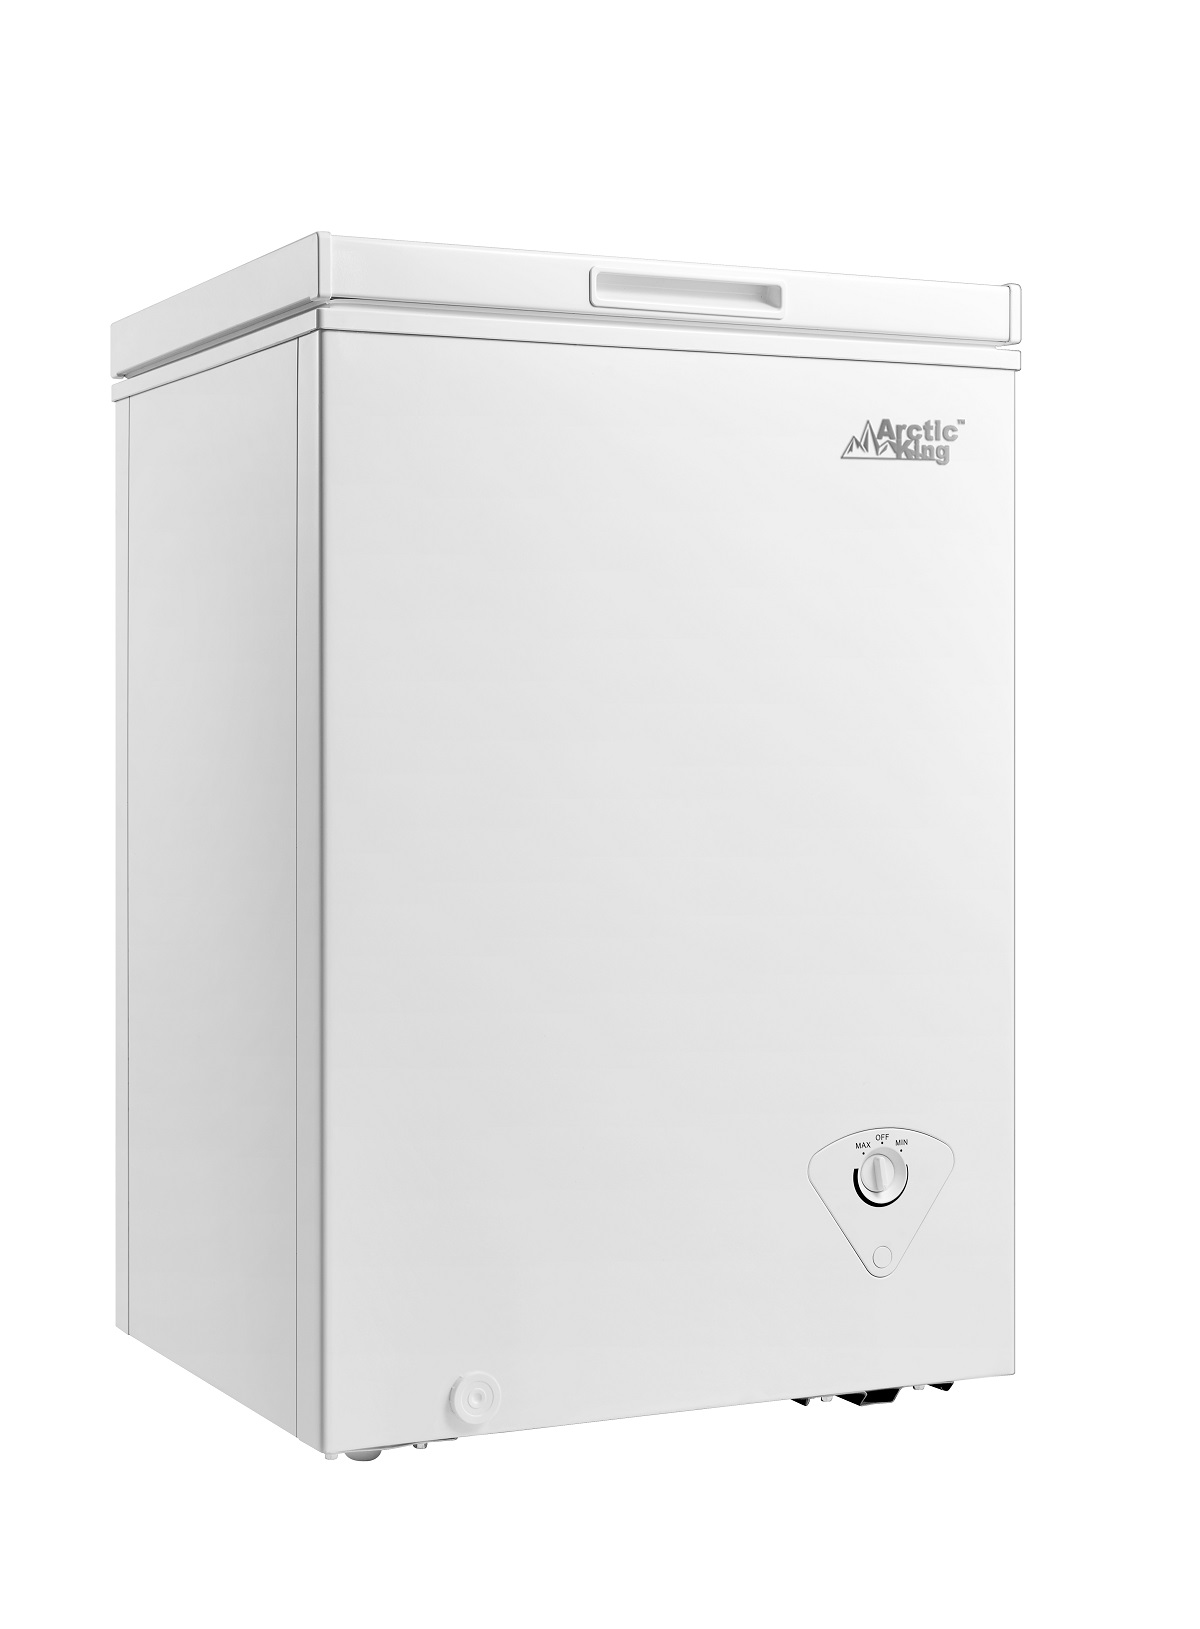 Arctic King 3.5 Cu ft Chest Freezer, White - image 1 of 5